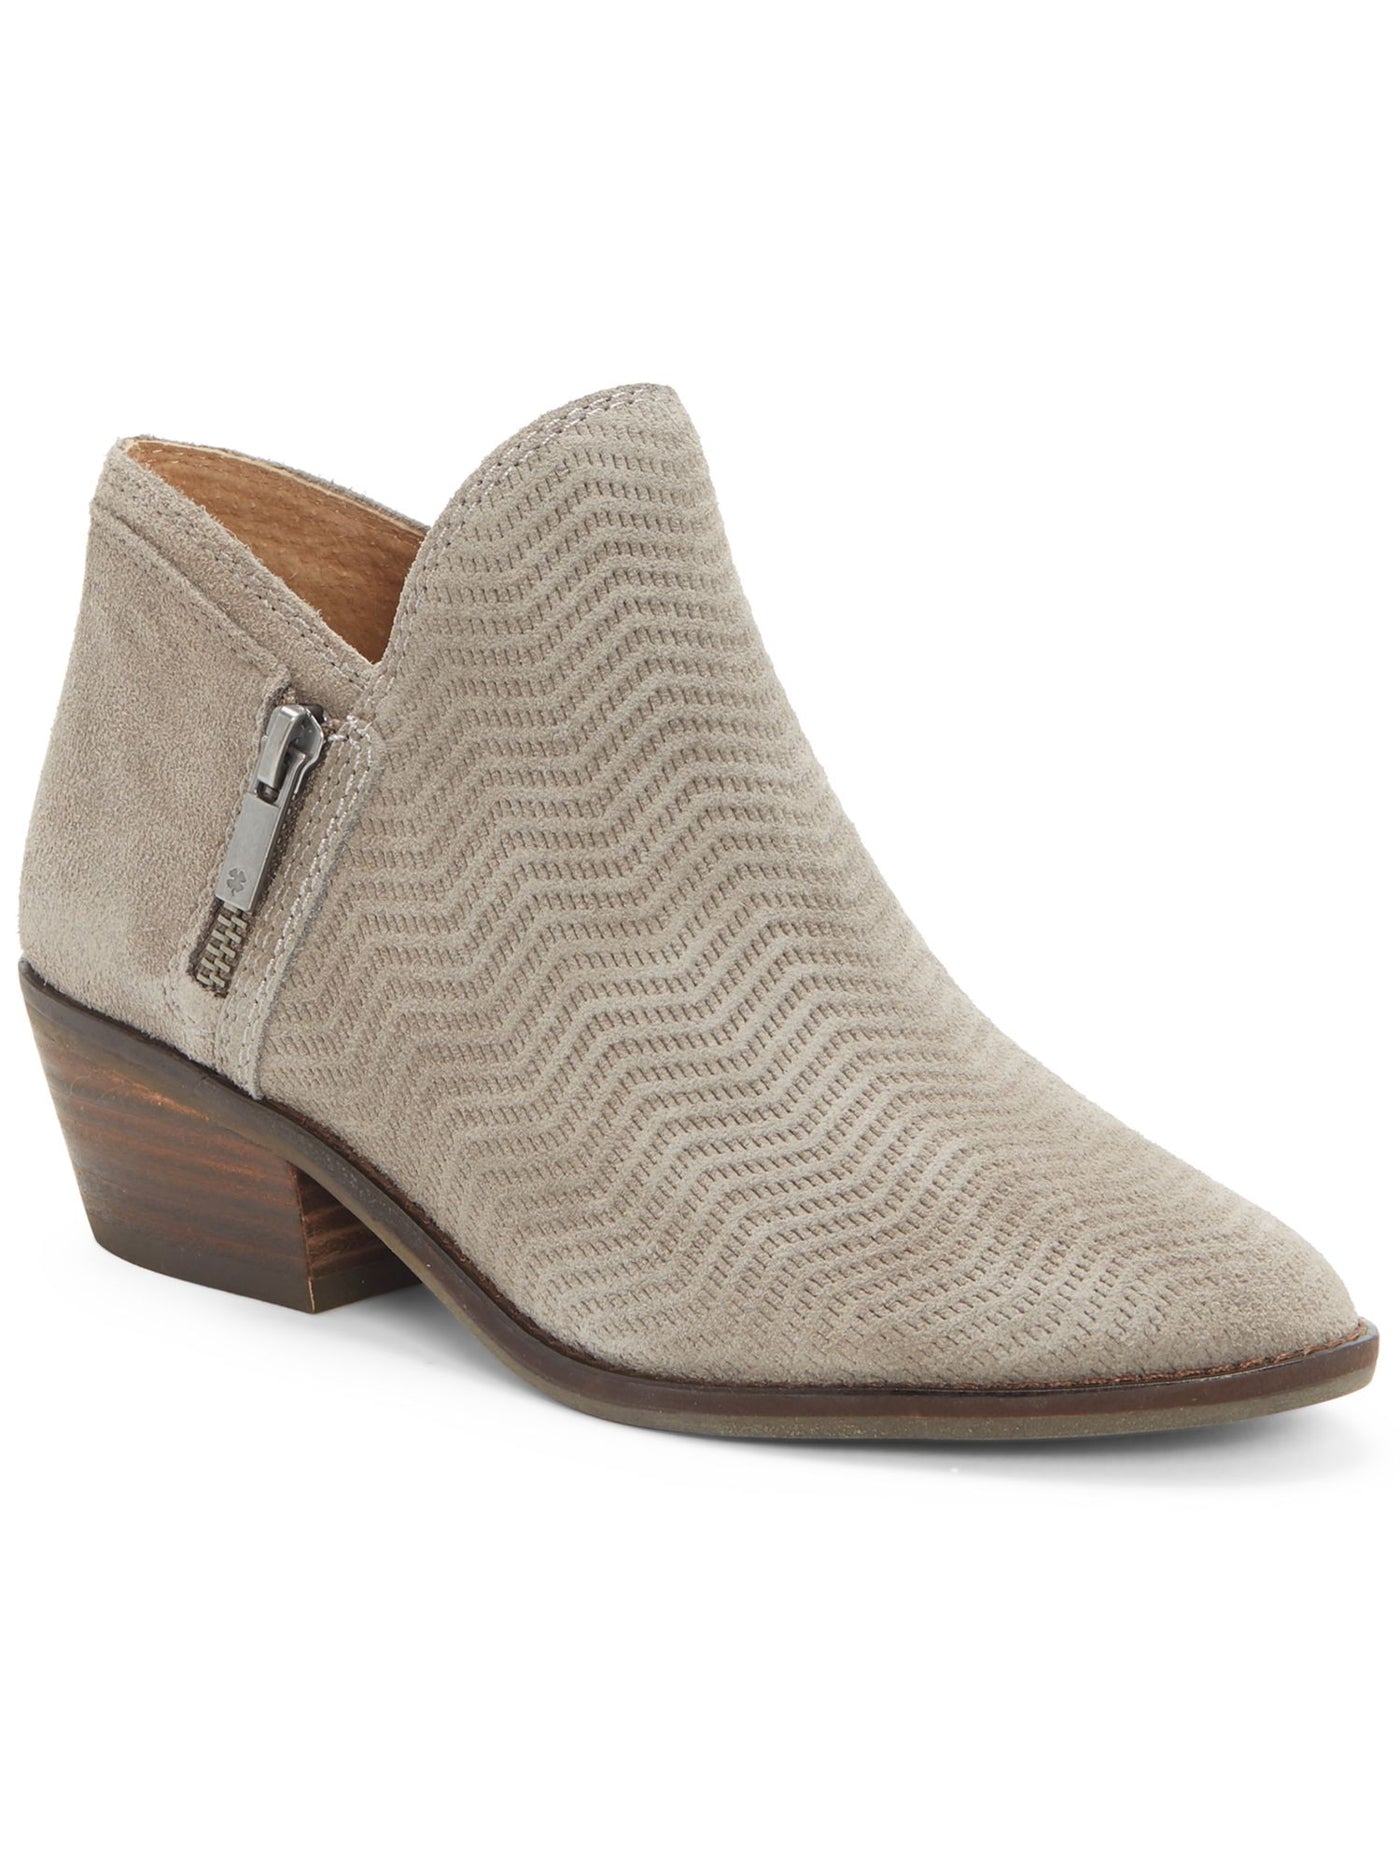 LUCKY BRAND Womens Gray V-Notch Side Cut-Out Cushioned Almond Toe Stacked Heel Zip-Up Booties 9.5